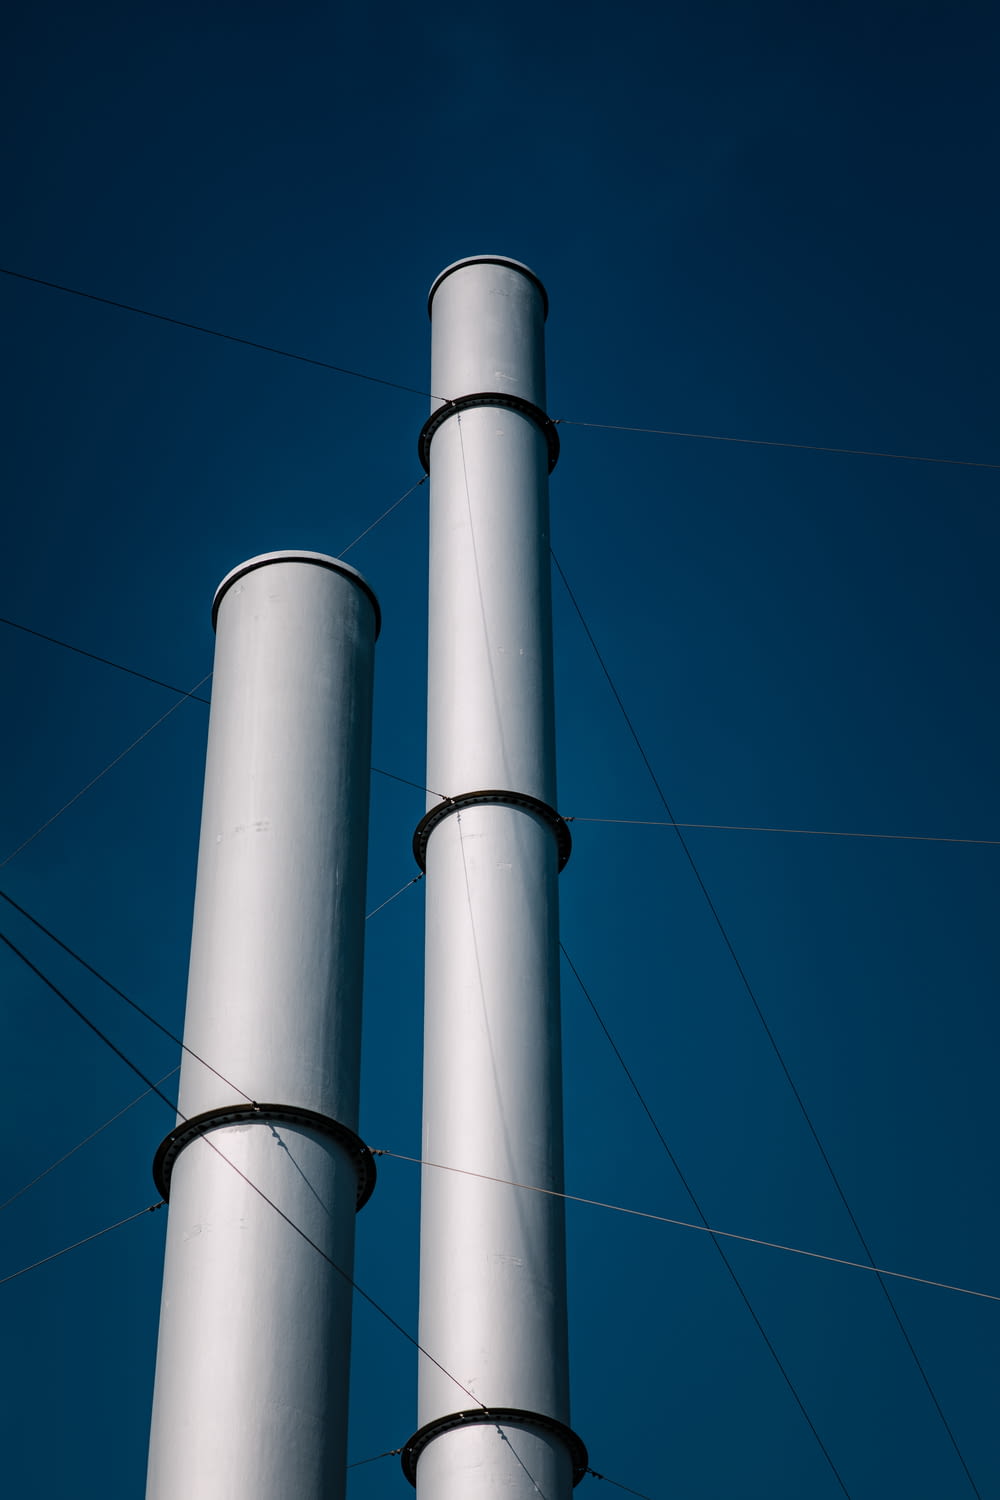 a couple of tall white poles sitting next to each other